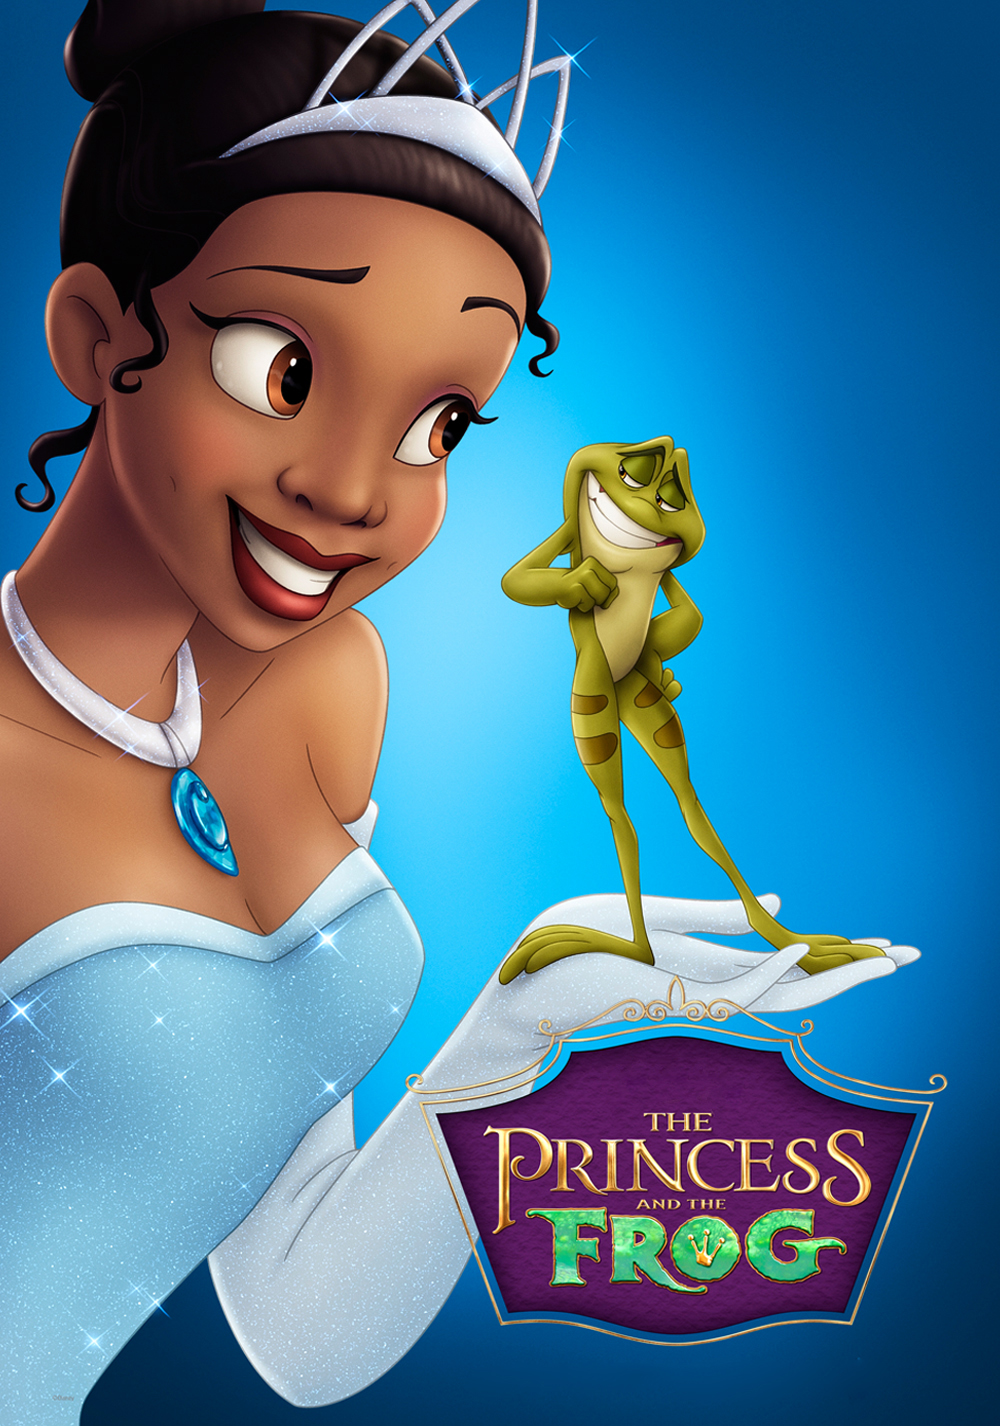 The Princess And The Frog Movie Poster - ID: 138765 - Image Abyss.